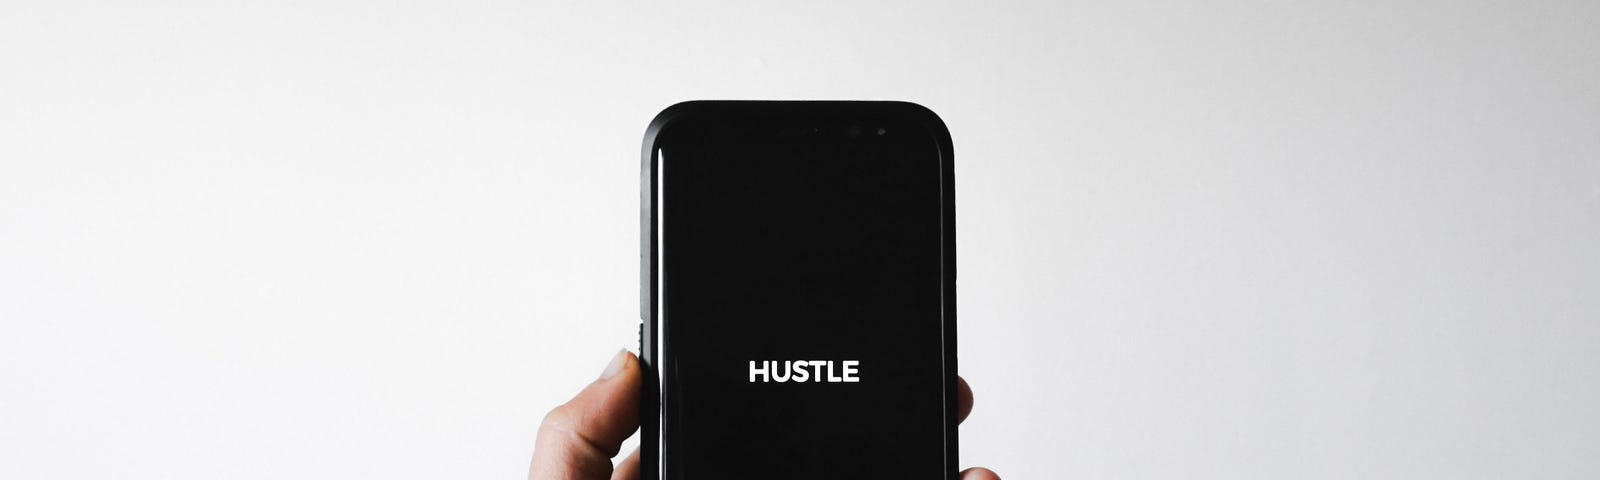 Black smartphone with the words ‘hustle’ on the screen